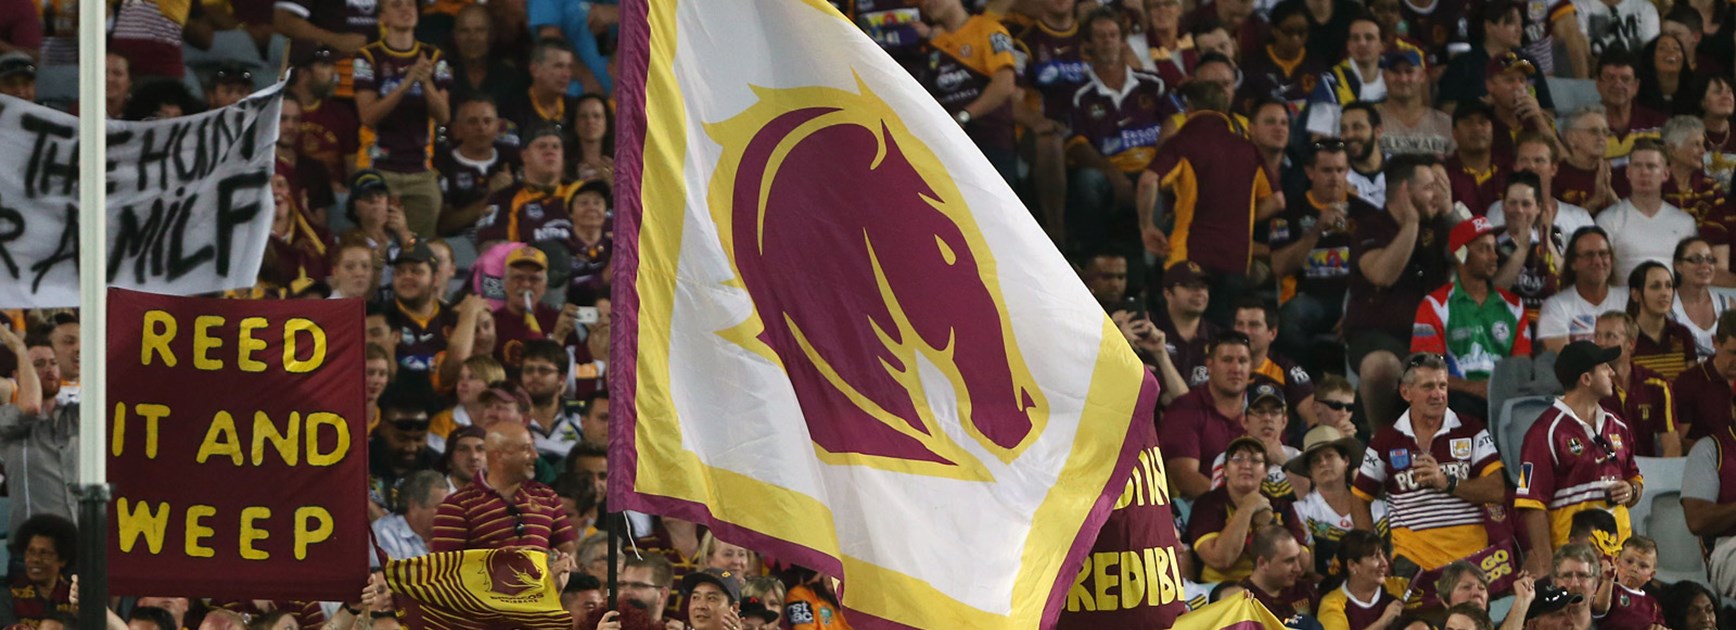 Wayne Bennett thanked Broncos fans for their support during the 2015 finals series.